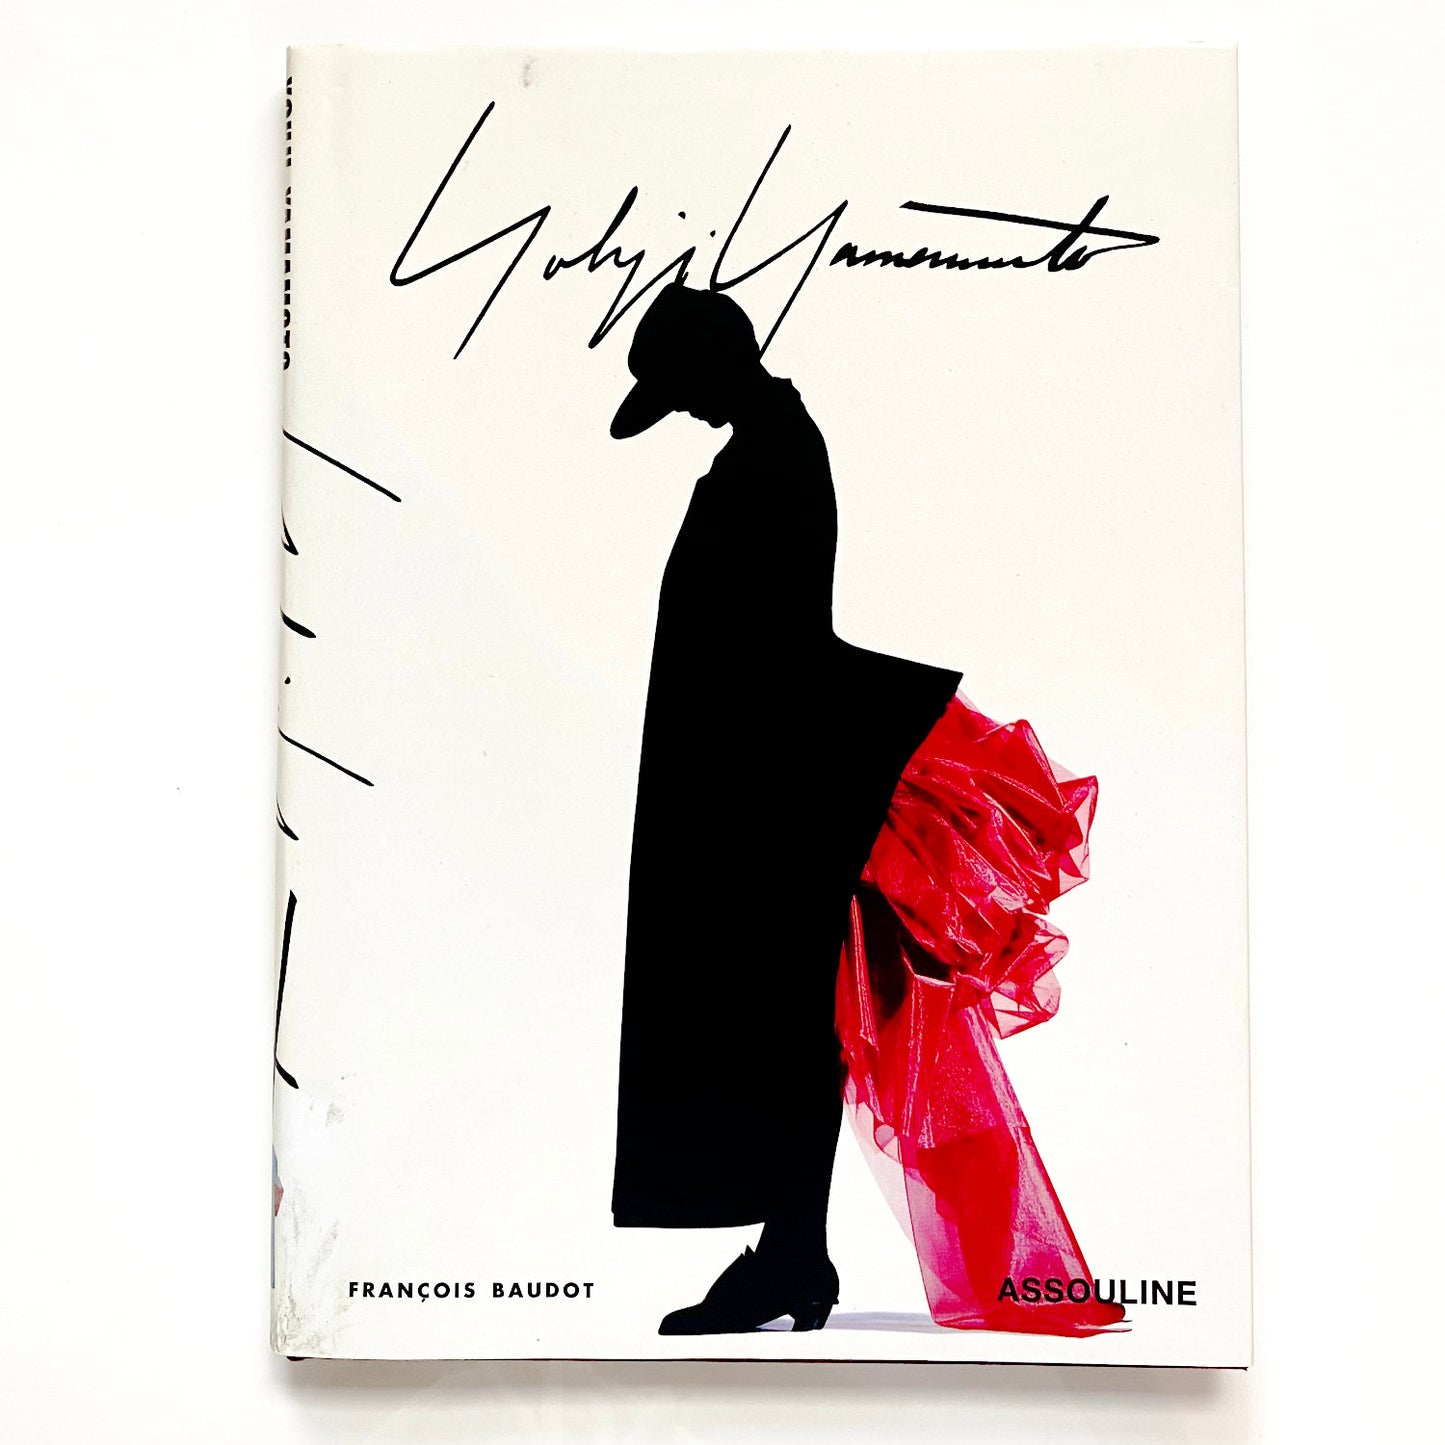 Yohji Yamamoto's influence on design has extended his philosophy to all of life aspects. This book documents his iconic moments.  Te Plus Te Archive.